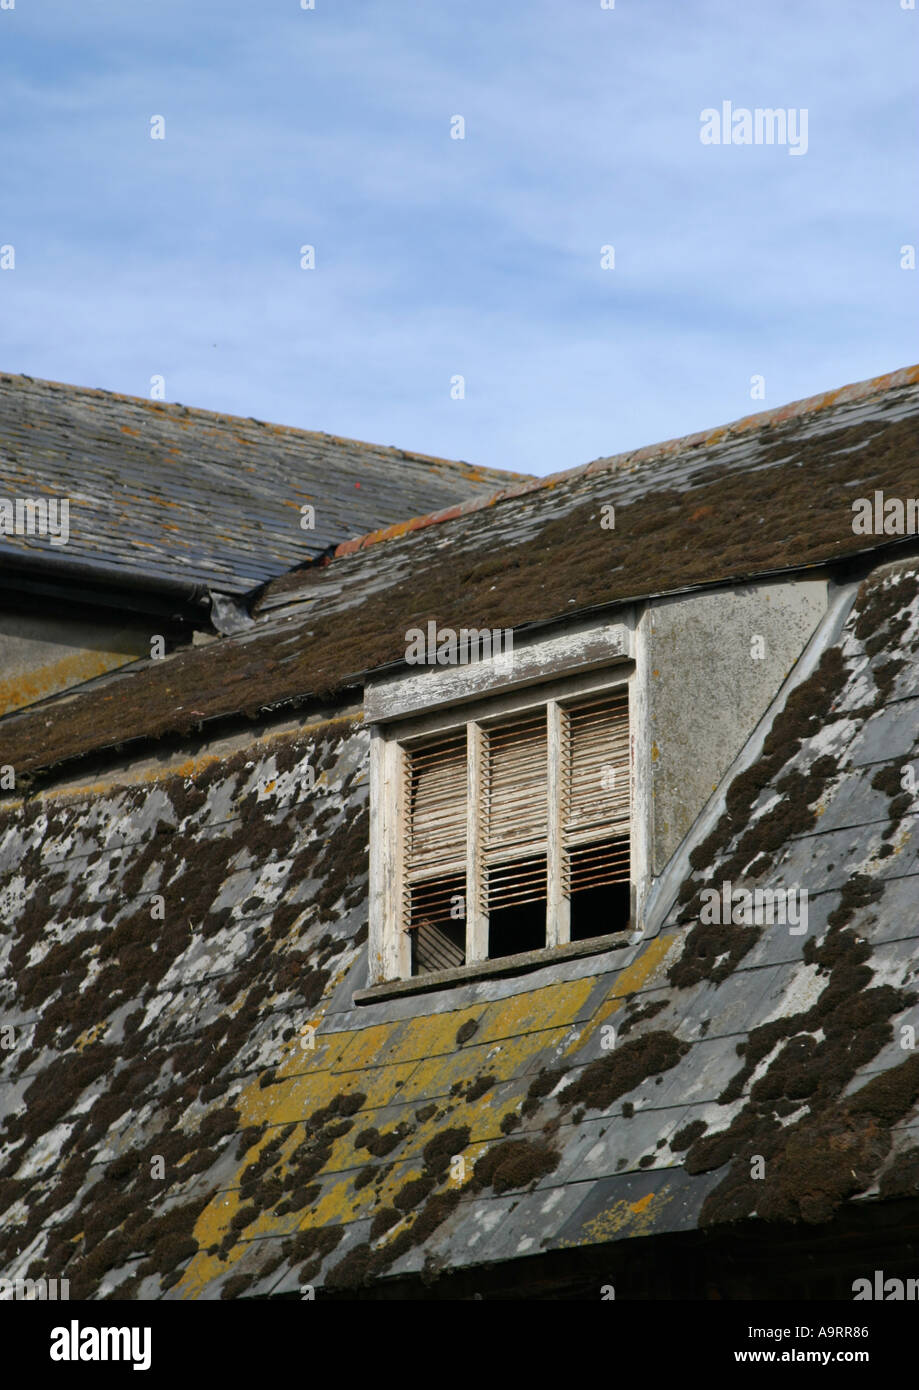 Moss growth on roof tiles Stock Photo